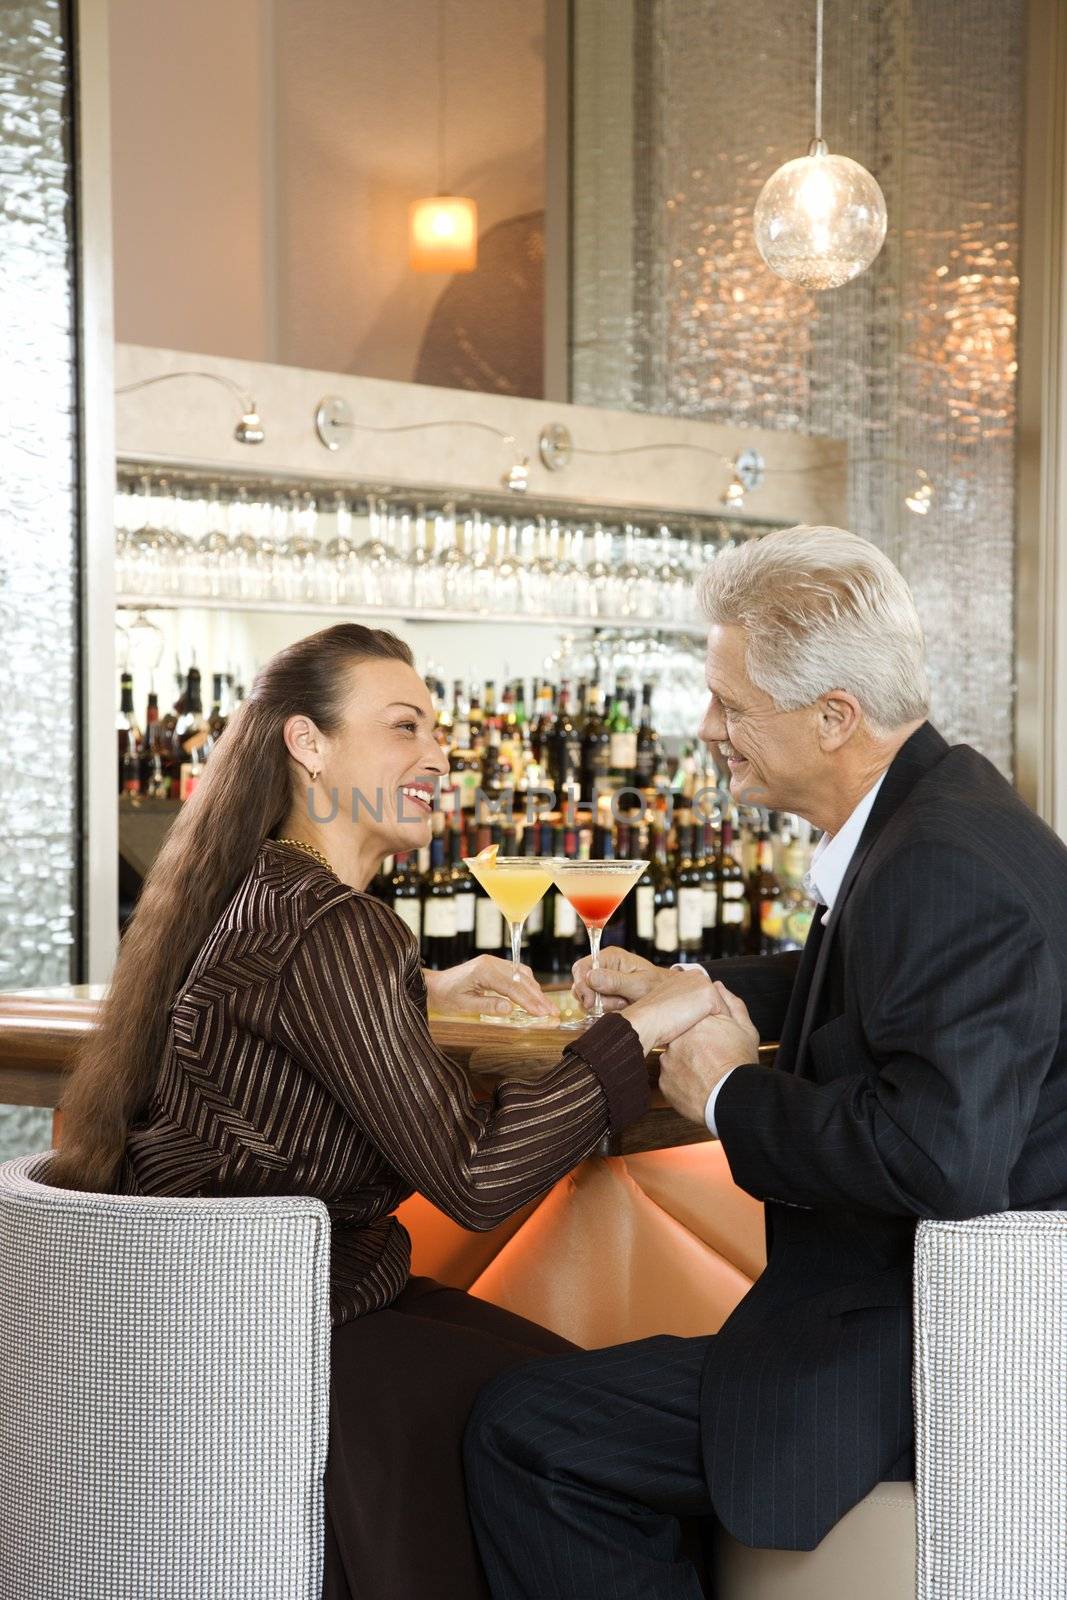 Caucasian mature adult male and prime adult female sitting at bar holding hands.